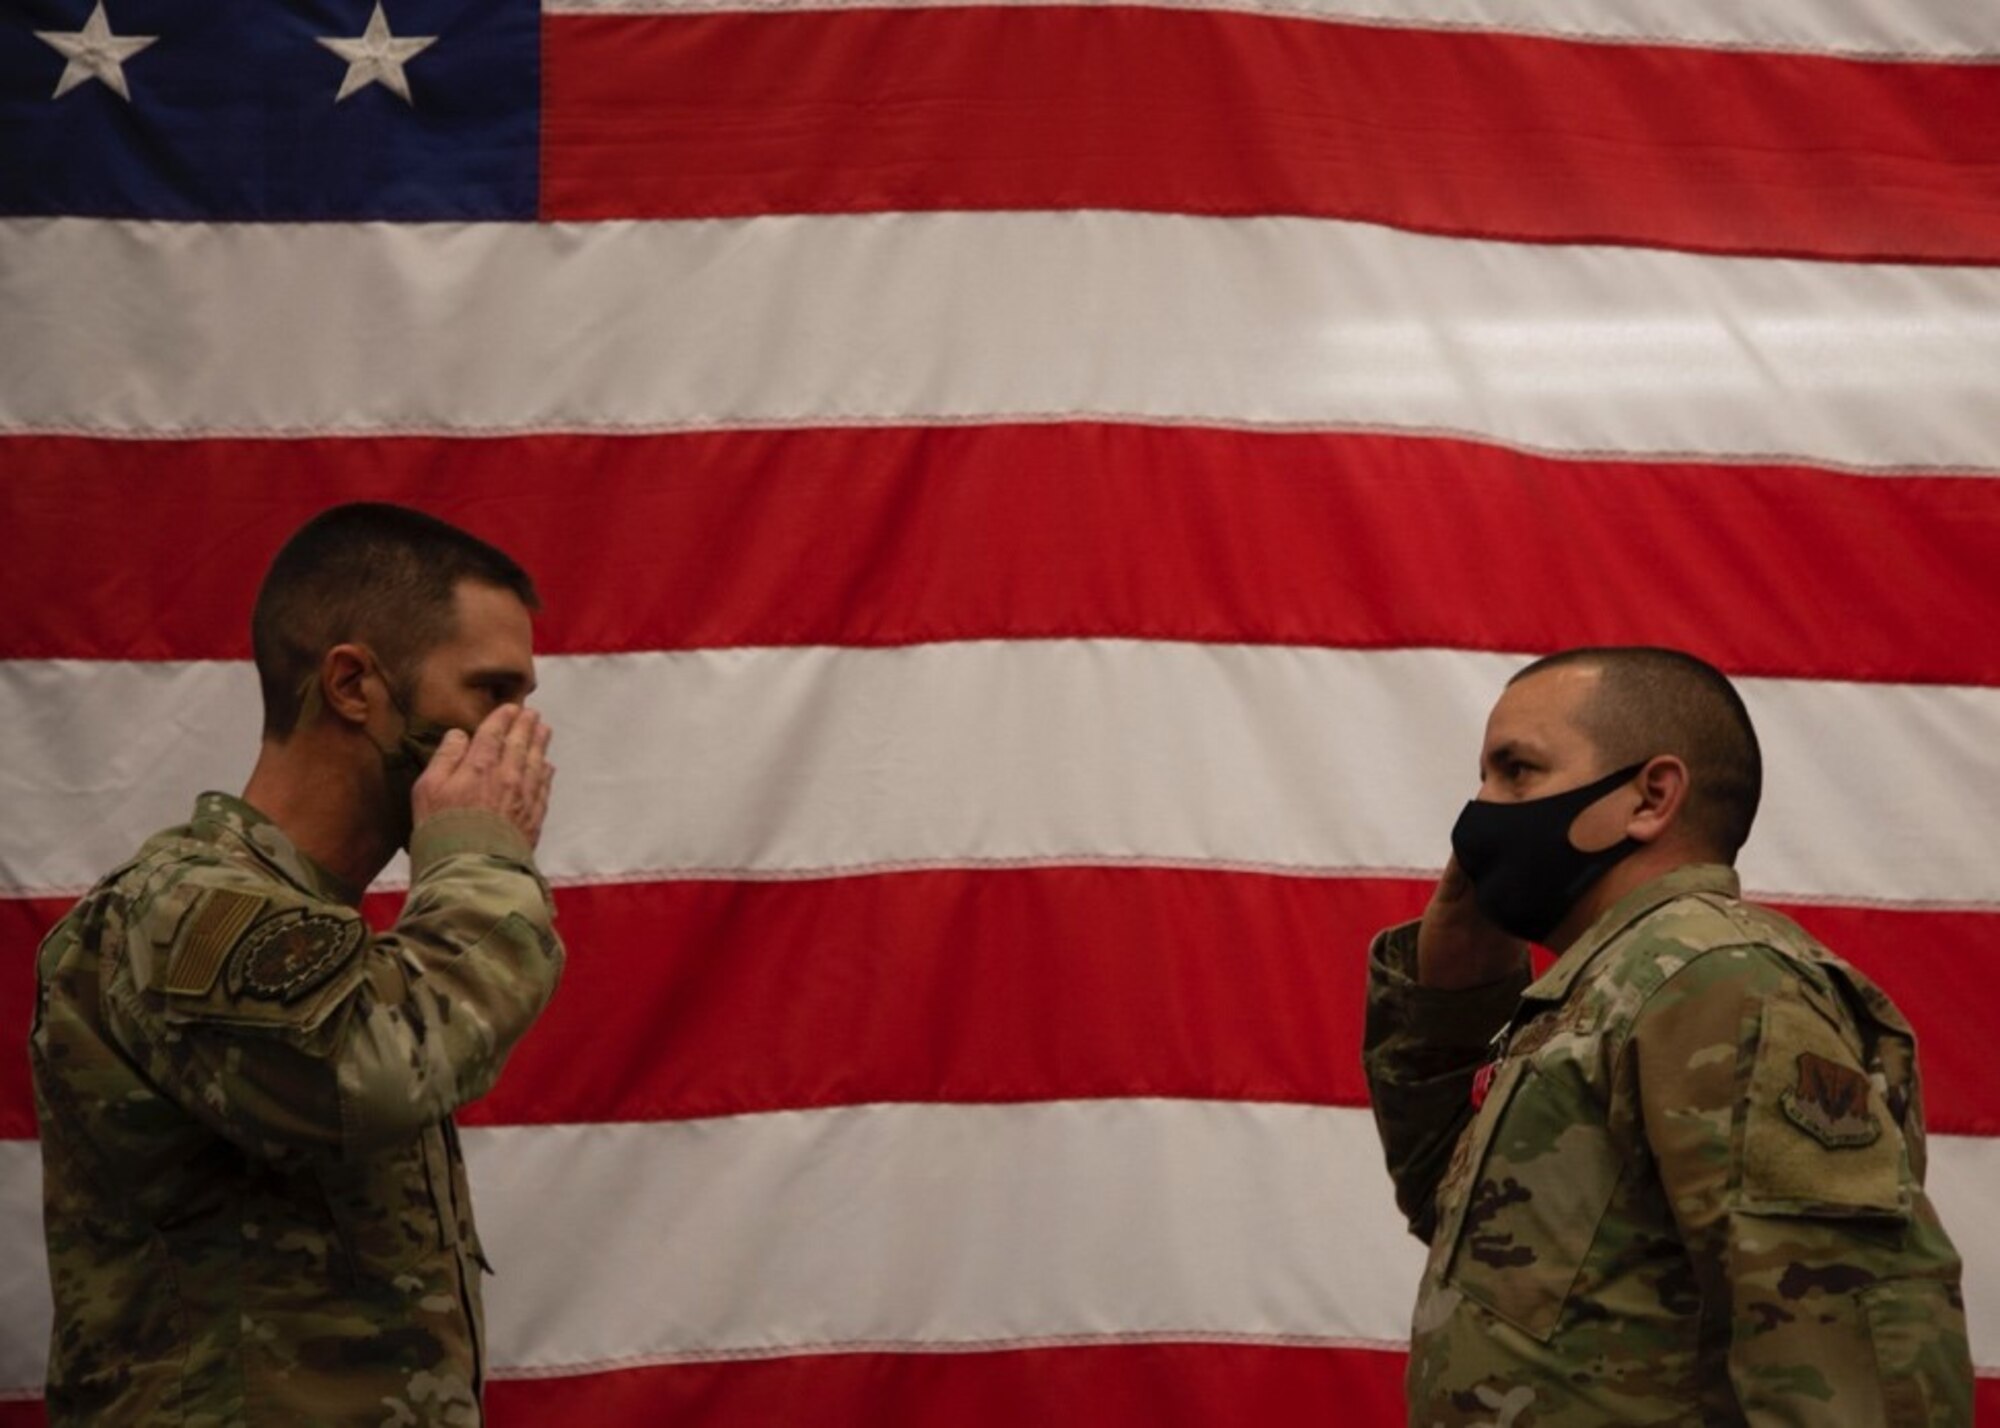 U.S. Air Force Lt. Col. Kevin Fletcher, 726th Air Control Squadron commander, salutes Master Sgt. Joe Rodriguez, 726th Air Control Squadron RF transmissions systems NCOIC, at Mountain Home Air Force Base, Idaho, on Oct. 9, 2020. Rodriquez served as the RF transmissions systems NCOIC at Asad Airbase, Iraq, from Oct. 9, 2019 to June 23, 2020. (U.S. Air Force Photo by Airman 1st Class Eric Brown)